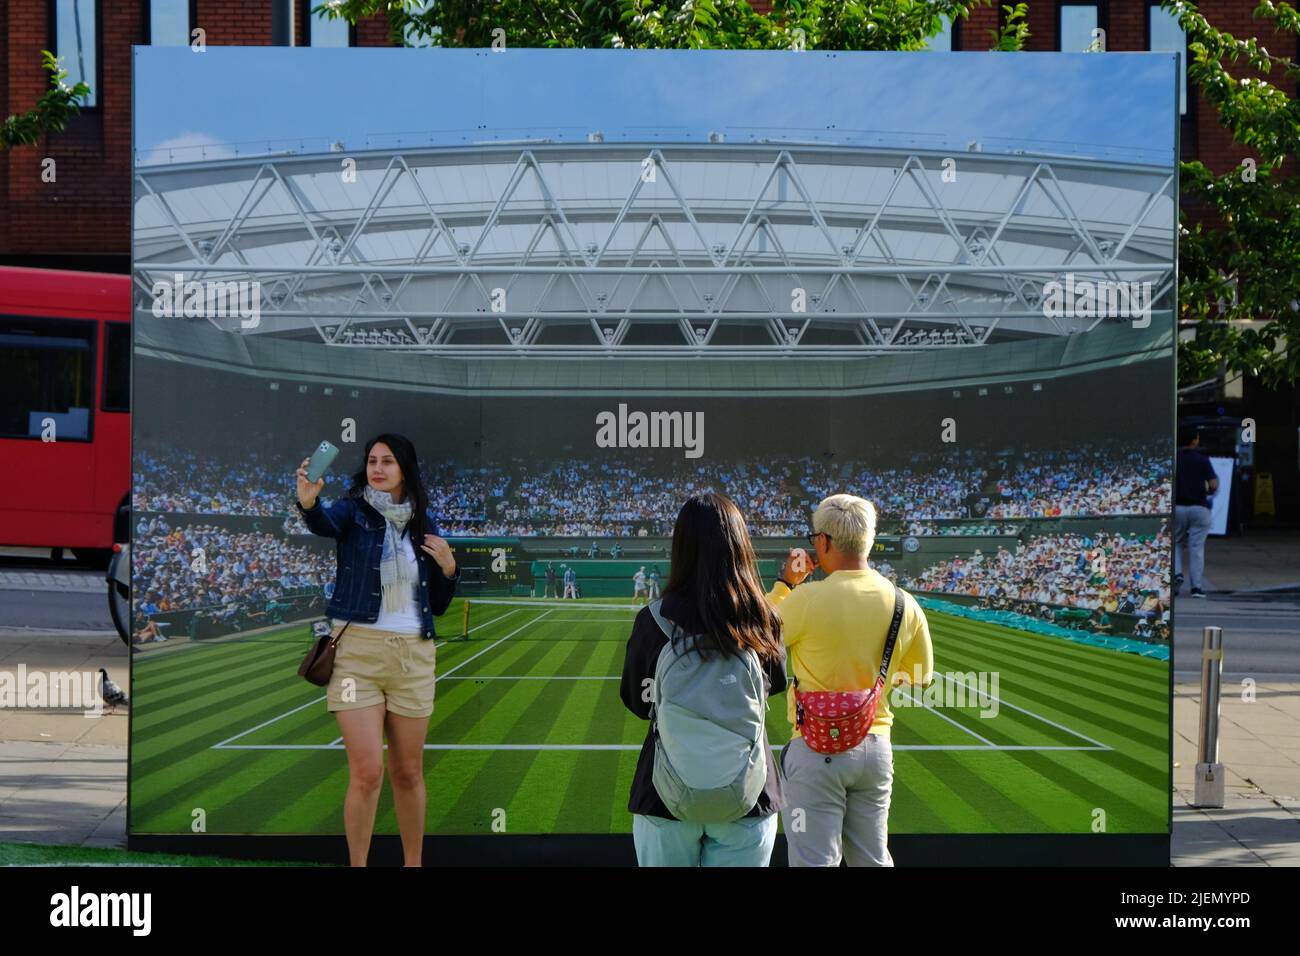 London, UK, 27th June, 2022. A woman takes a sefie in front of a Centre Court photo backdrop. Tennis themed shop displays and in Wimbledon Village and the main town centre can be seen as visitors are welcomes for  the 2022 tennis tournament. This year the ground returns to full capacity after the Covid pandemic. Credit: Eleventh Hour Photography/Alamy Live News Stock Photo